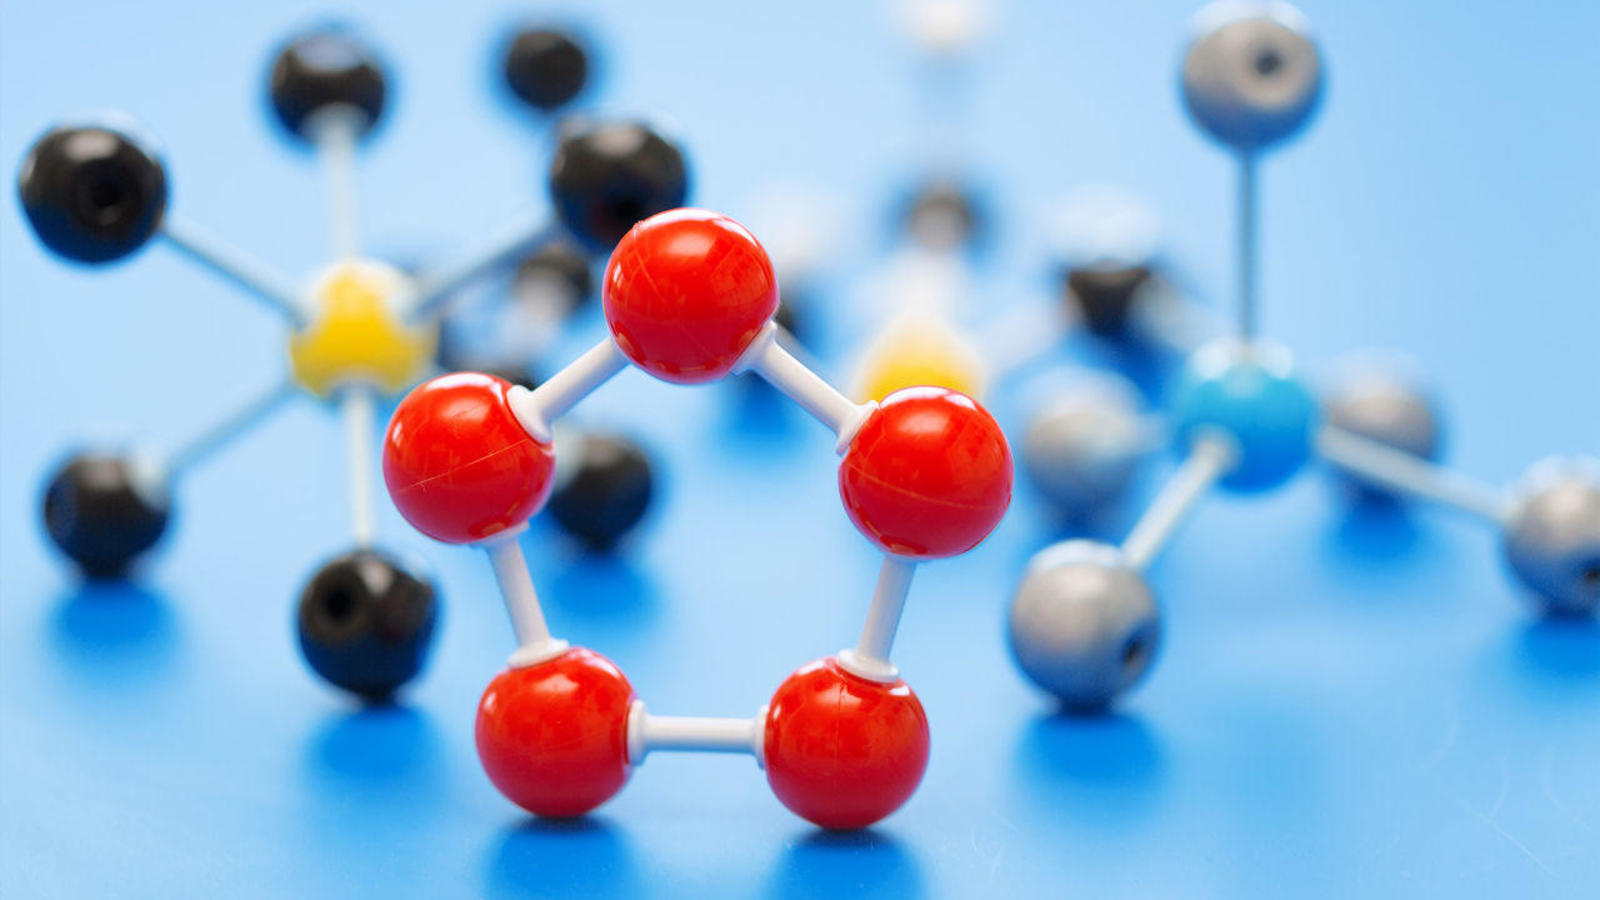 Can You Pass This General Knowledge “True or False” Quiz? Molecules